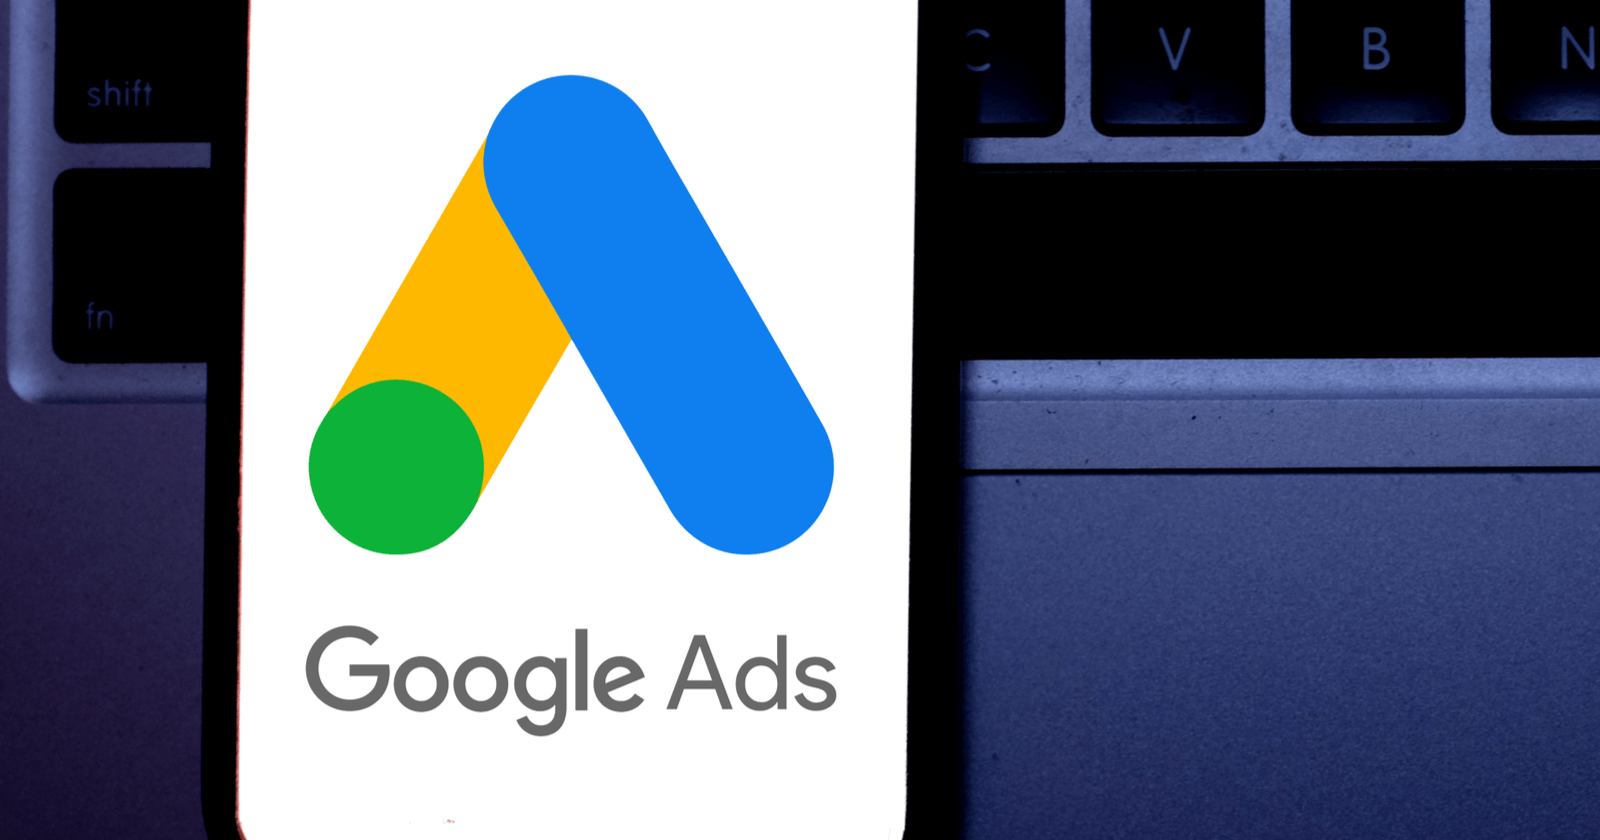 4 essential tips for auditing google ads accounts 5f5930a245c31